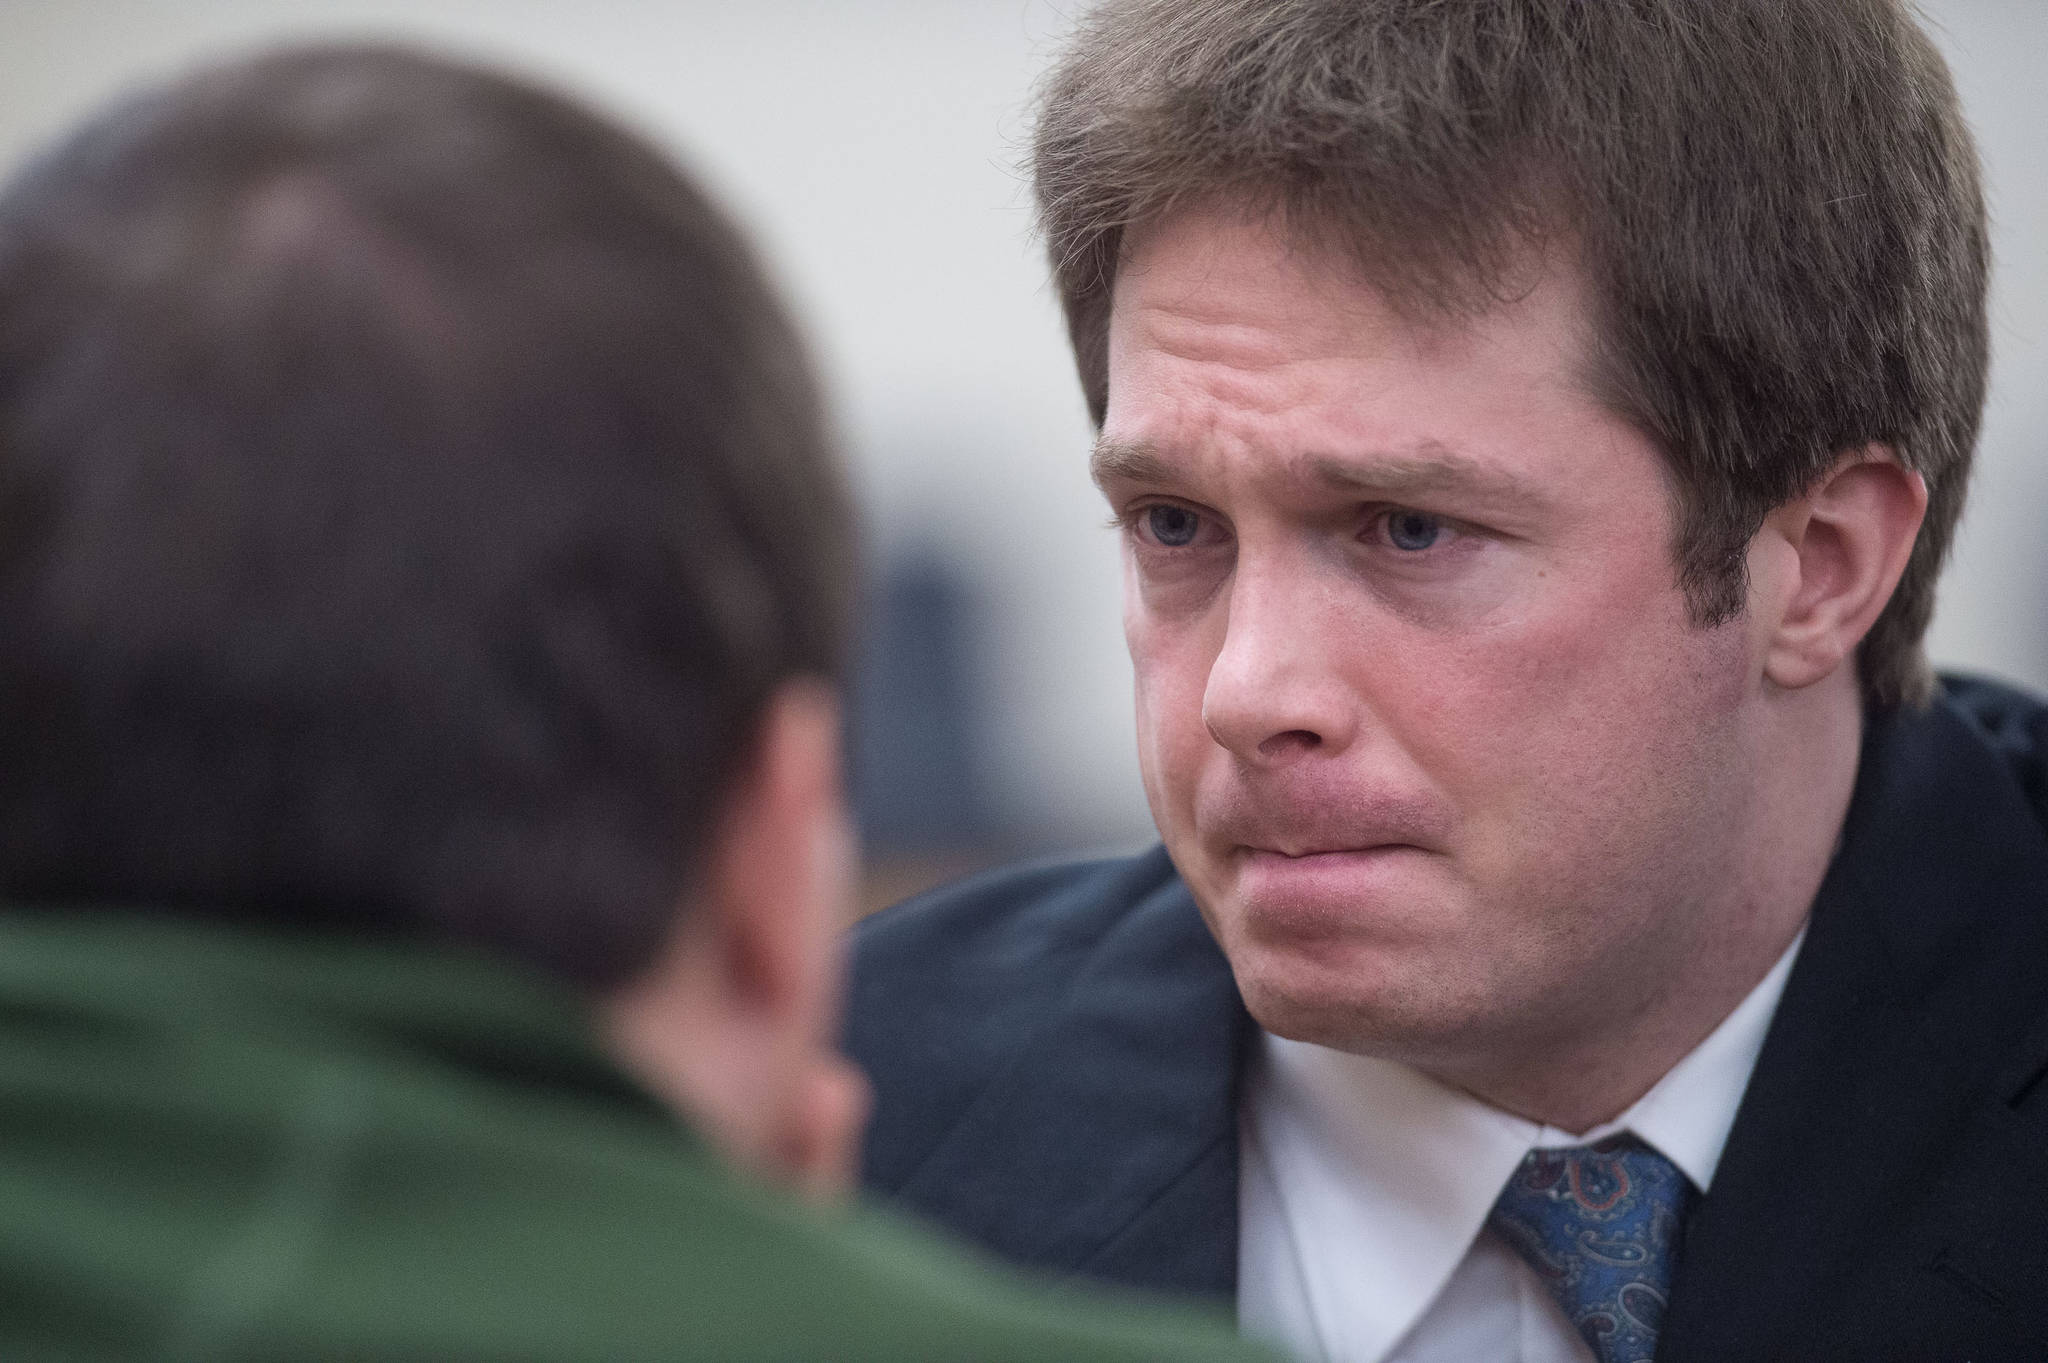 Christopher Strawn, right, confers with criminal defense attorney Nicholas Polasky during his trial in Juneau Superior Court on Monday, Oct. 16, 2017. Strawn, 34, faces charges of first-degree and second-degree murder, manslaughter, criminally negligent homicide, third-degree assault and weapons misconduct in the shooting death of Brandon Cook in October 2015. (Michael Penn | Juneau Empire File)